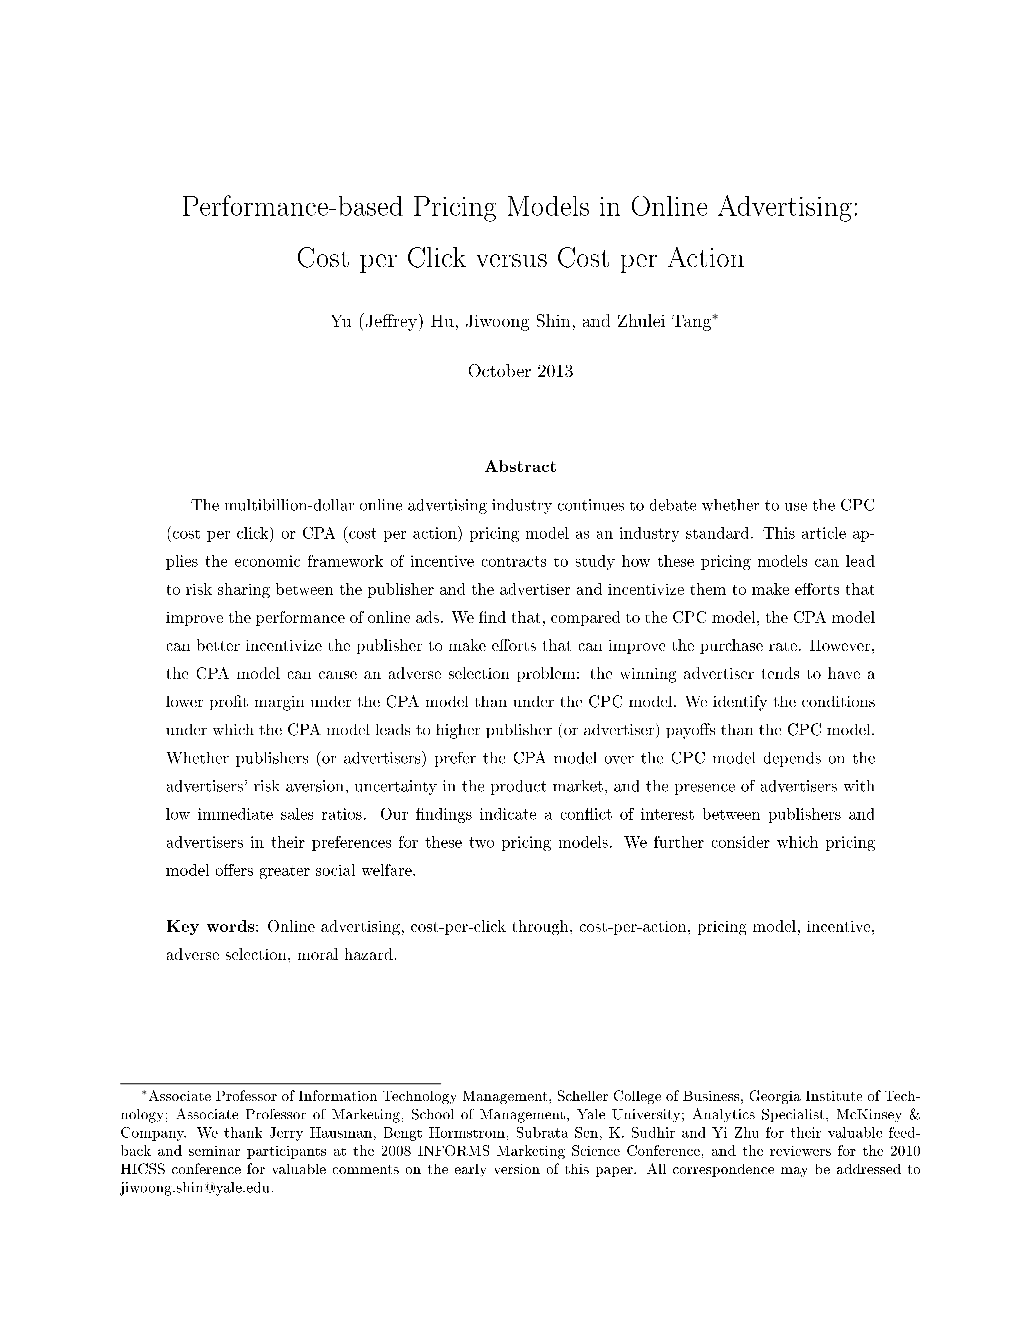 Performance-Based Pricing Models in Online Advertising: Cost Per Click Versus Cost Per Action